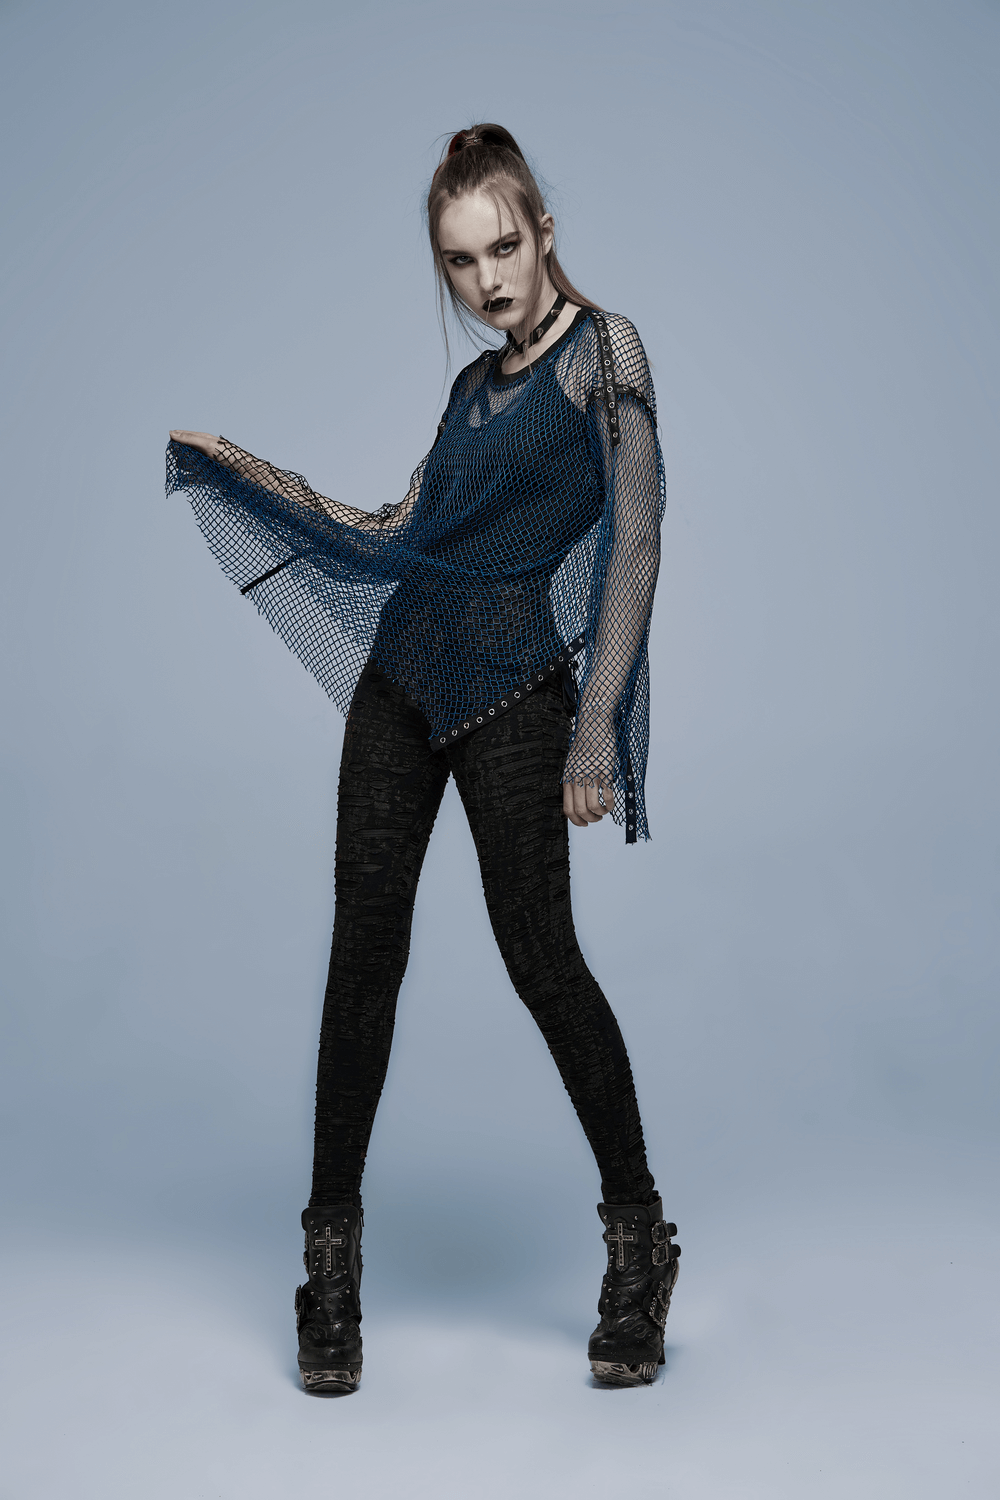 Edgy Netted Punk Asymmetrical Loose Long Top for Women - HARD'N'HEAVY